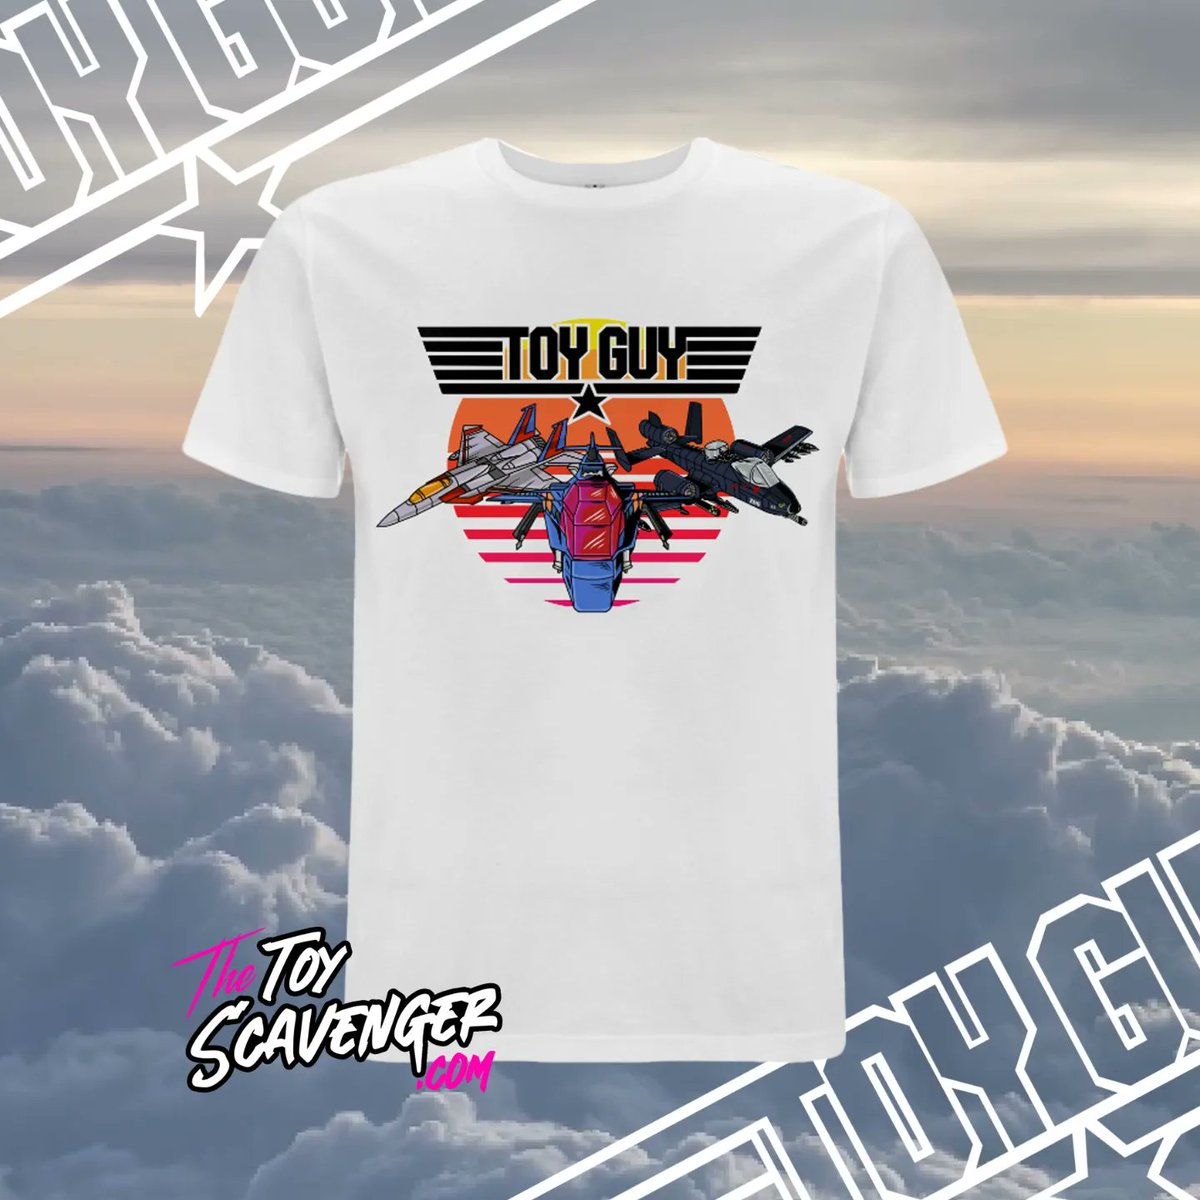 New T-Shirt just landed! ✈️ Im 100% a Toy Guy, I love #MASK, love #GIJoe, & love #Transformers, So check out my new art, Vintage Toy Inspired Shirt Now Available to Pre Order - Once Pre Order ends, you will not be able to get this again. thetoyscavenger.com/products/toy-s…